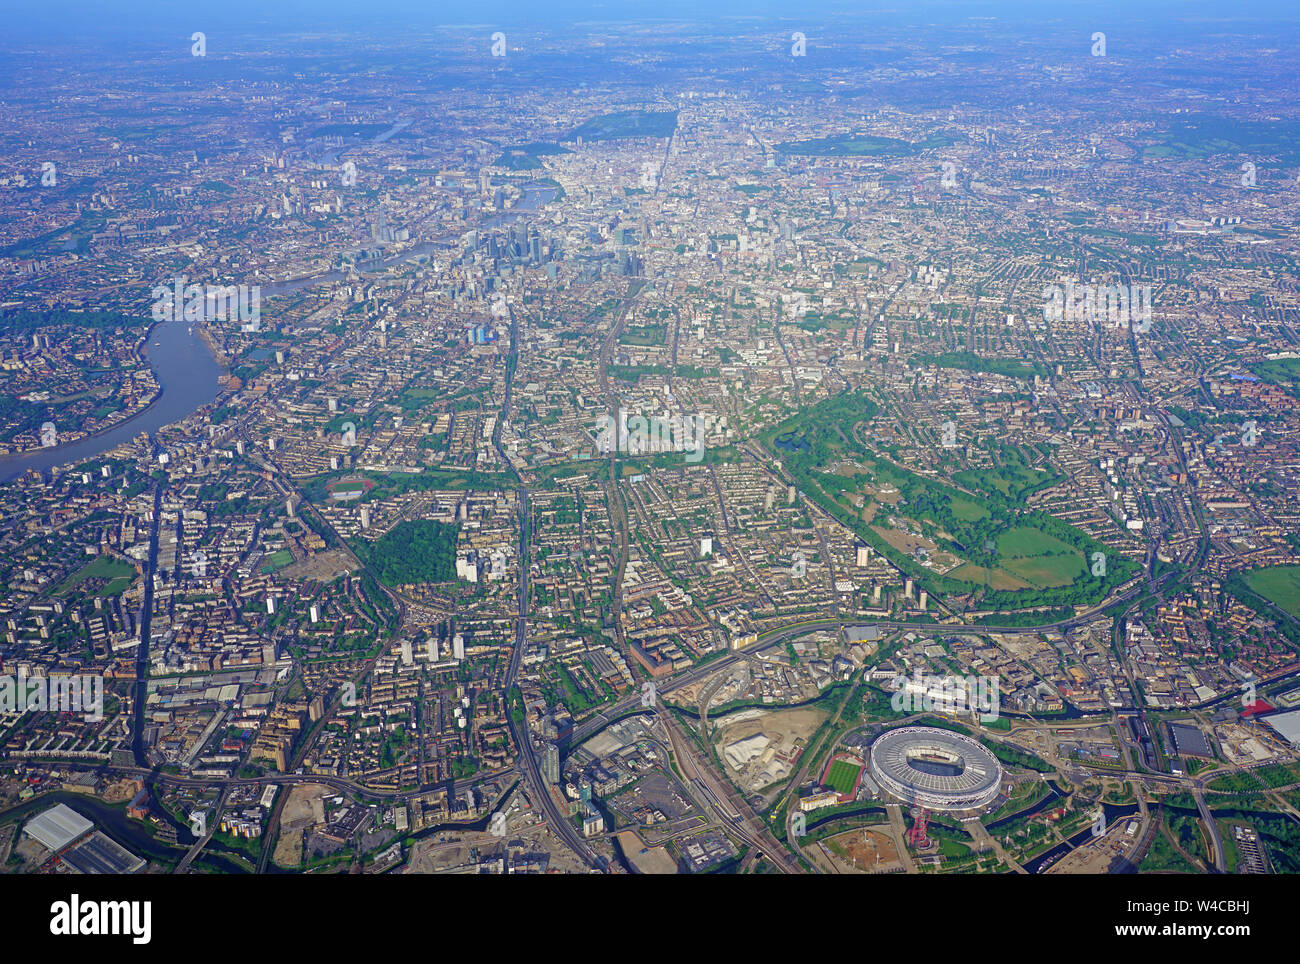 LONDON, ENGLAND -2 JUN 2019- Aerial view of the Greater London area near the Queen Elizabeth Olympic Park and London Stadium, home of West Ham United Stock Photo